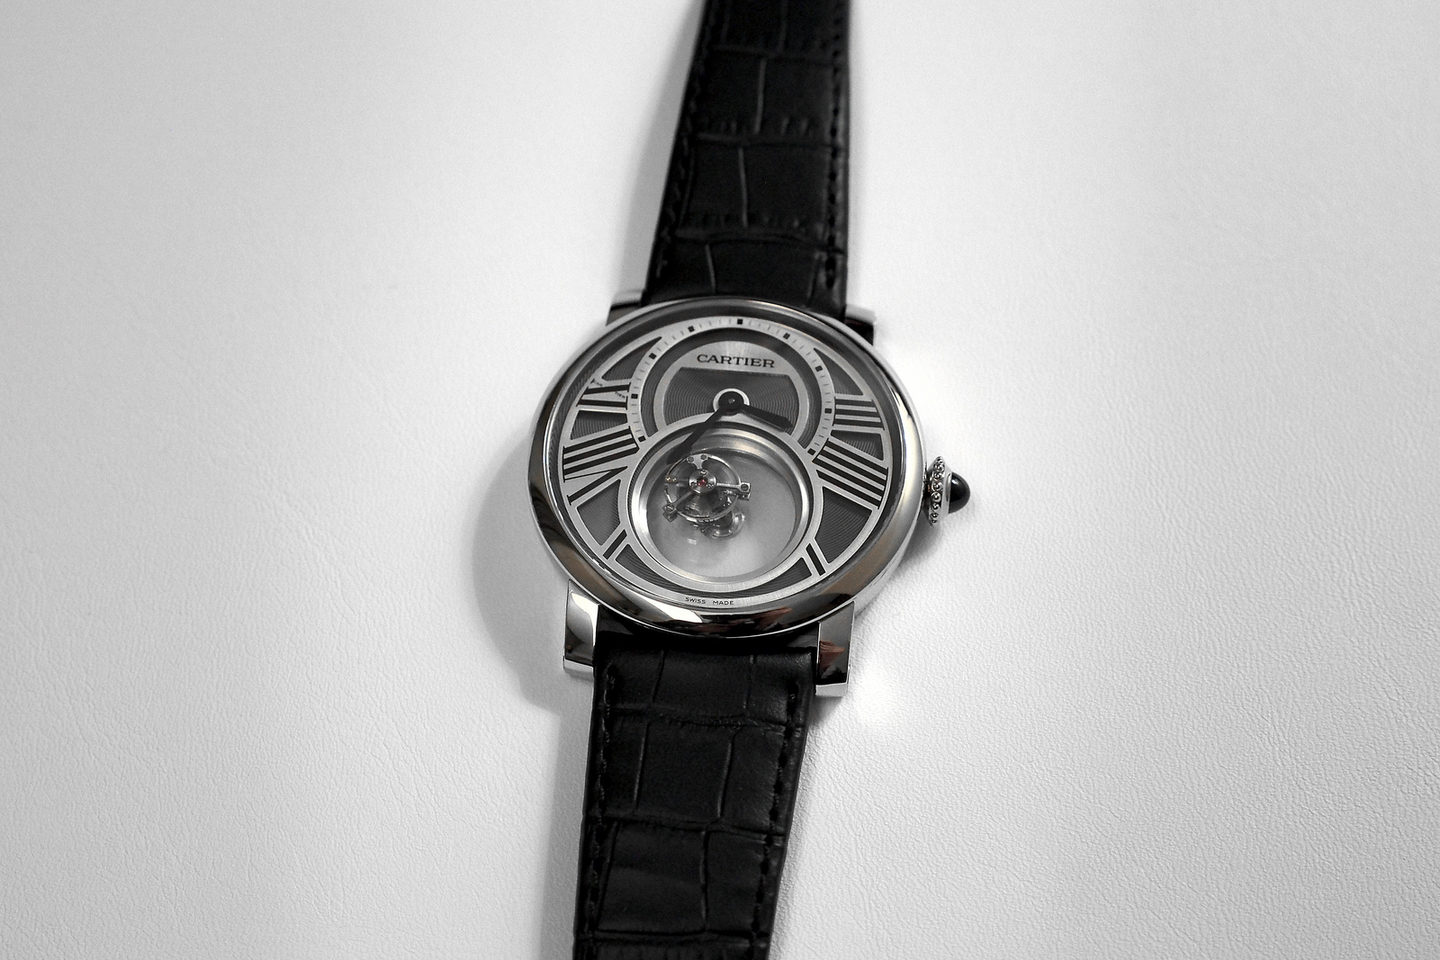 The Cartier Mystery Watch collection